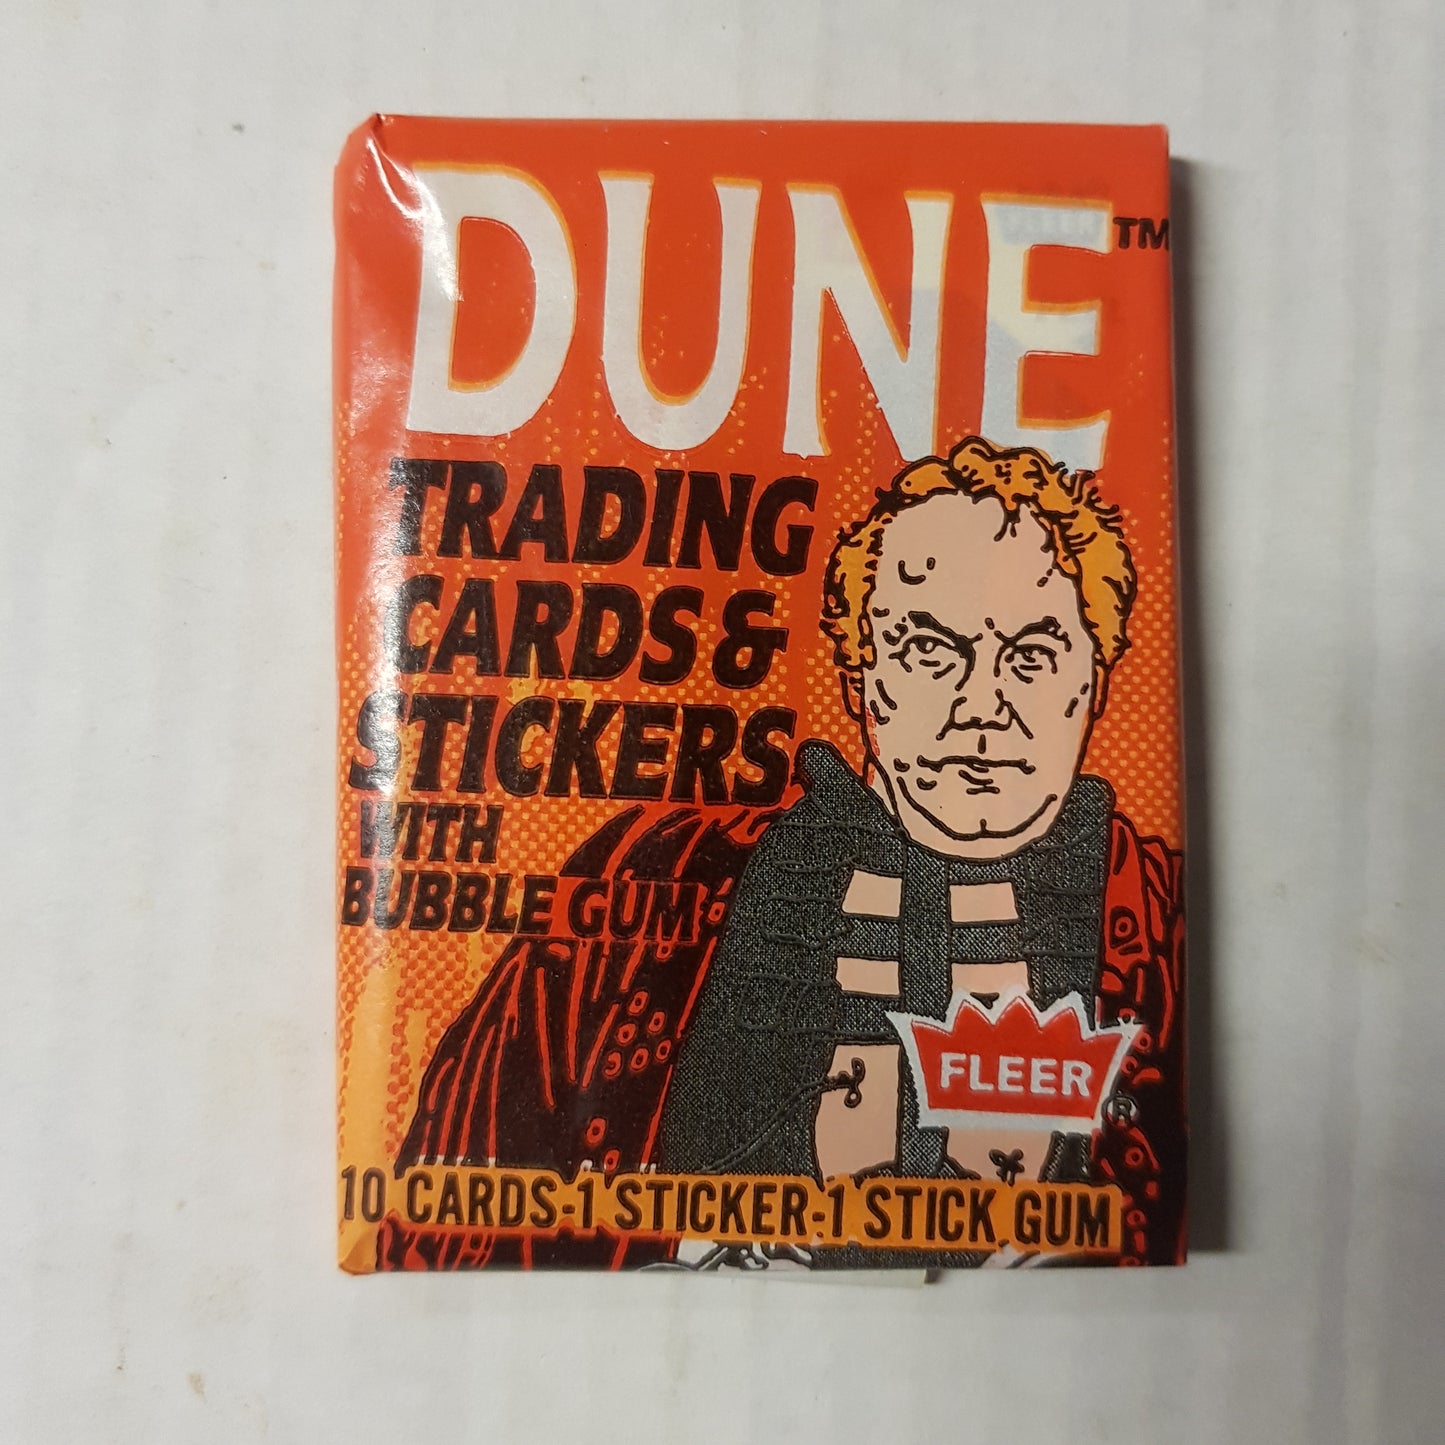 Dune Trading Cards & Stickers with Bubble Gum (1984)